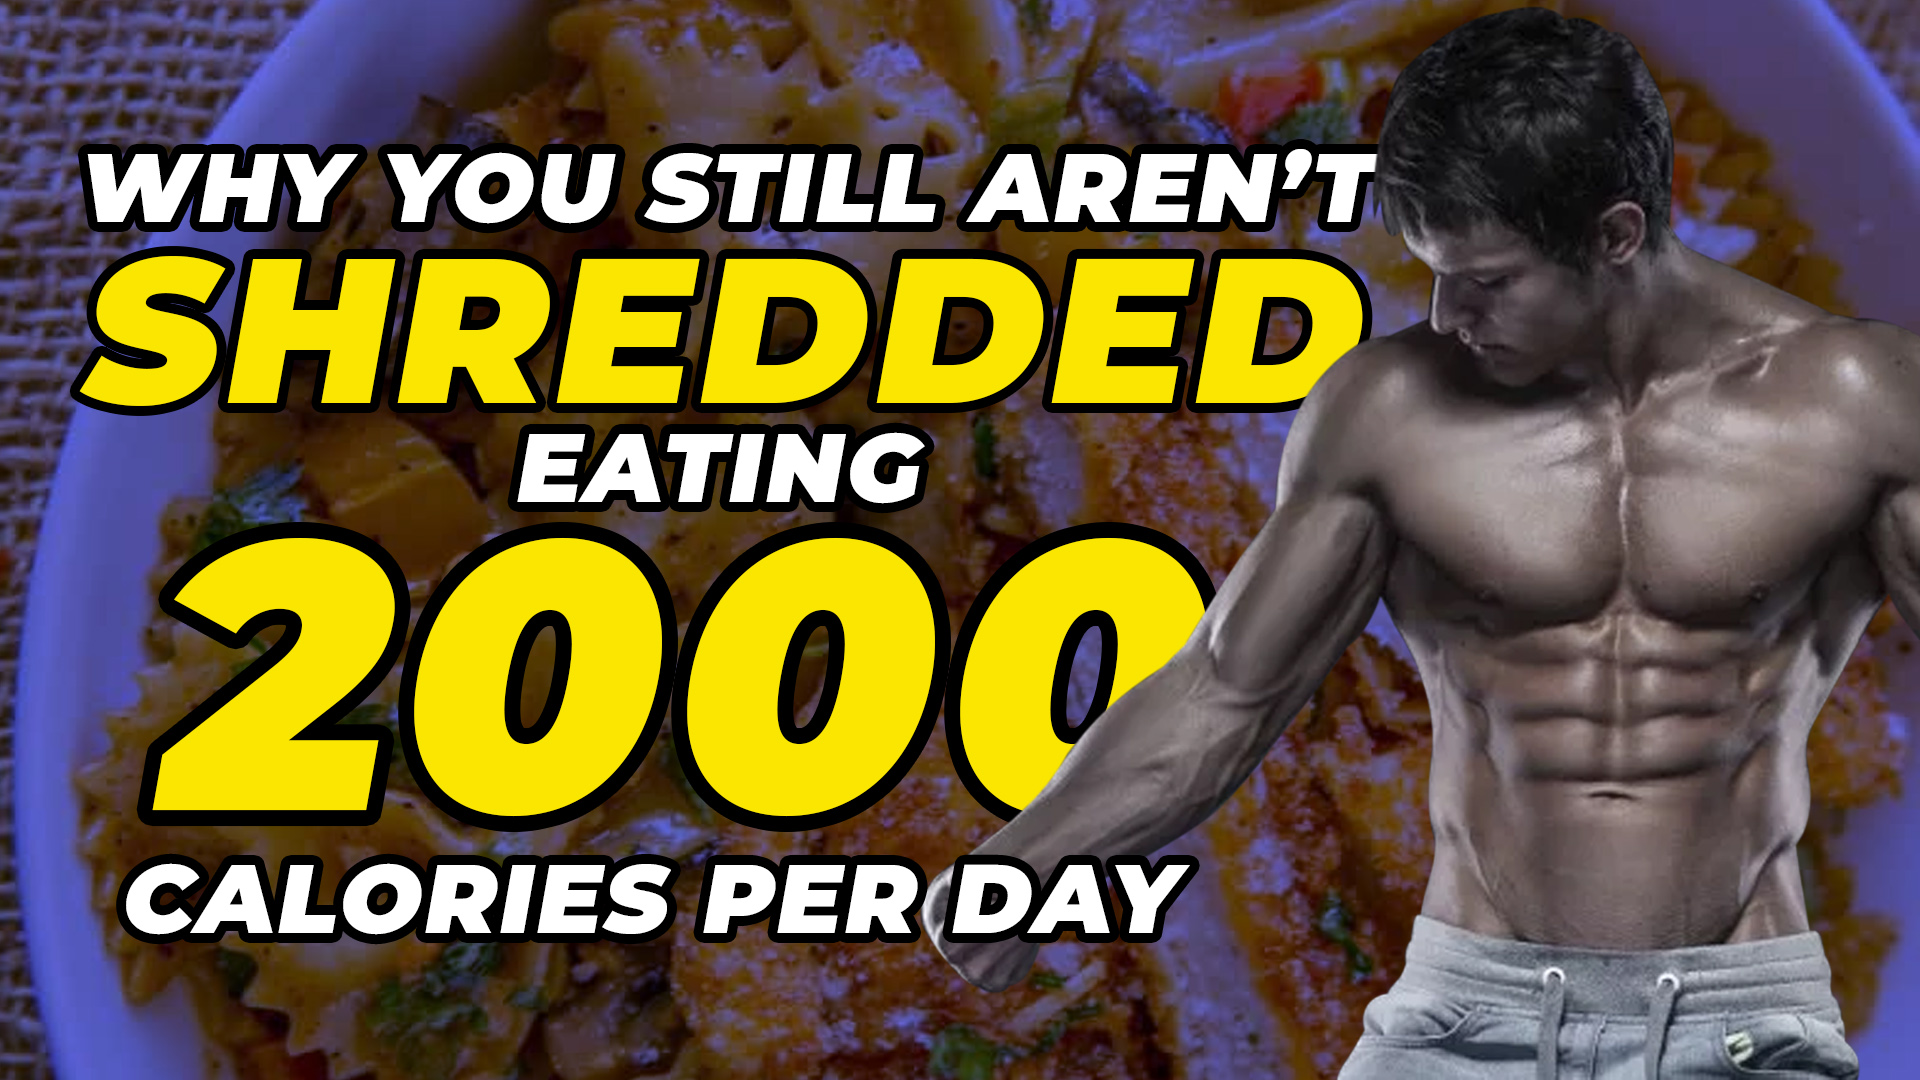 Why You Still Aren’t Shredded Eating Less Than 2000 Calories Per Day